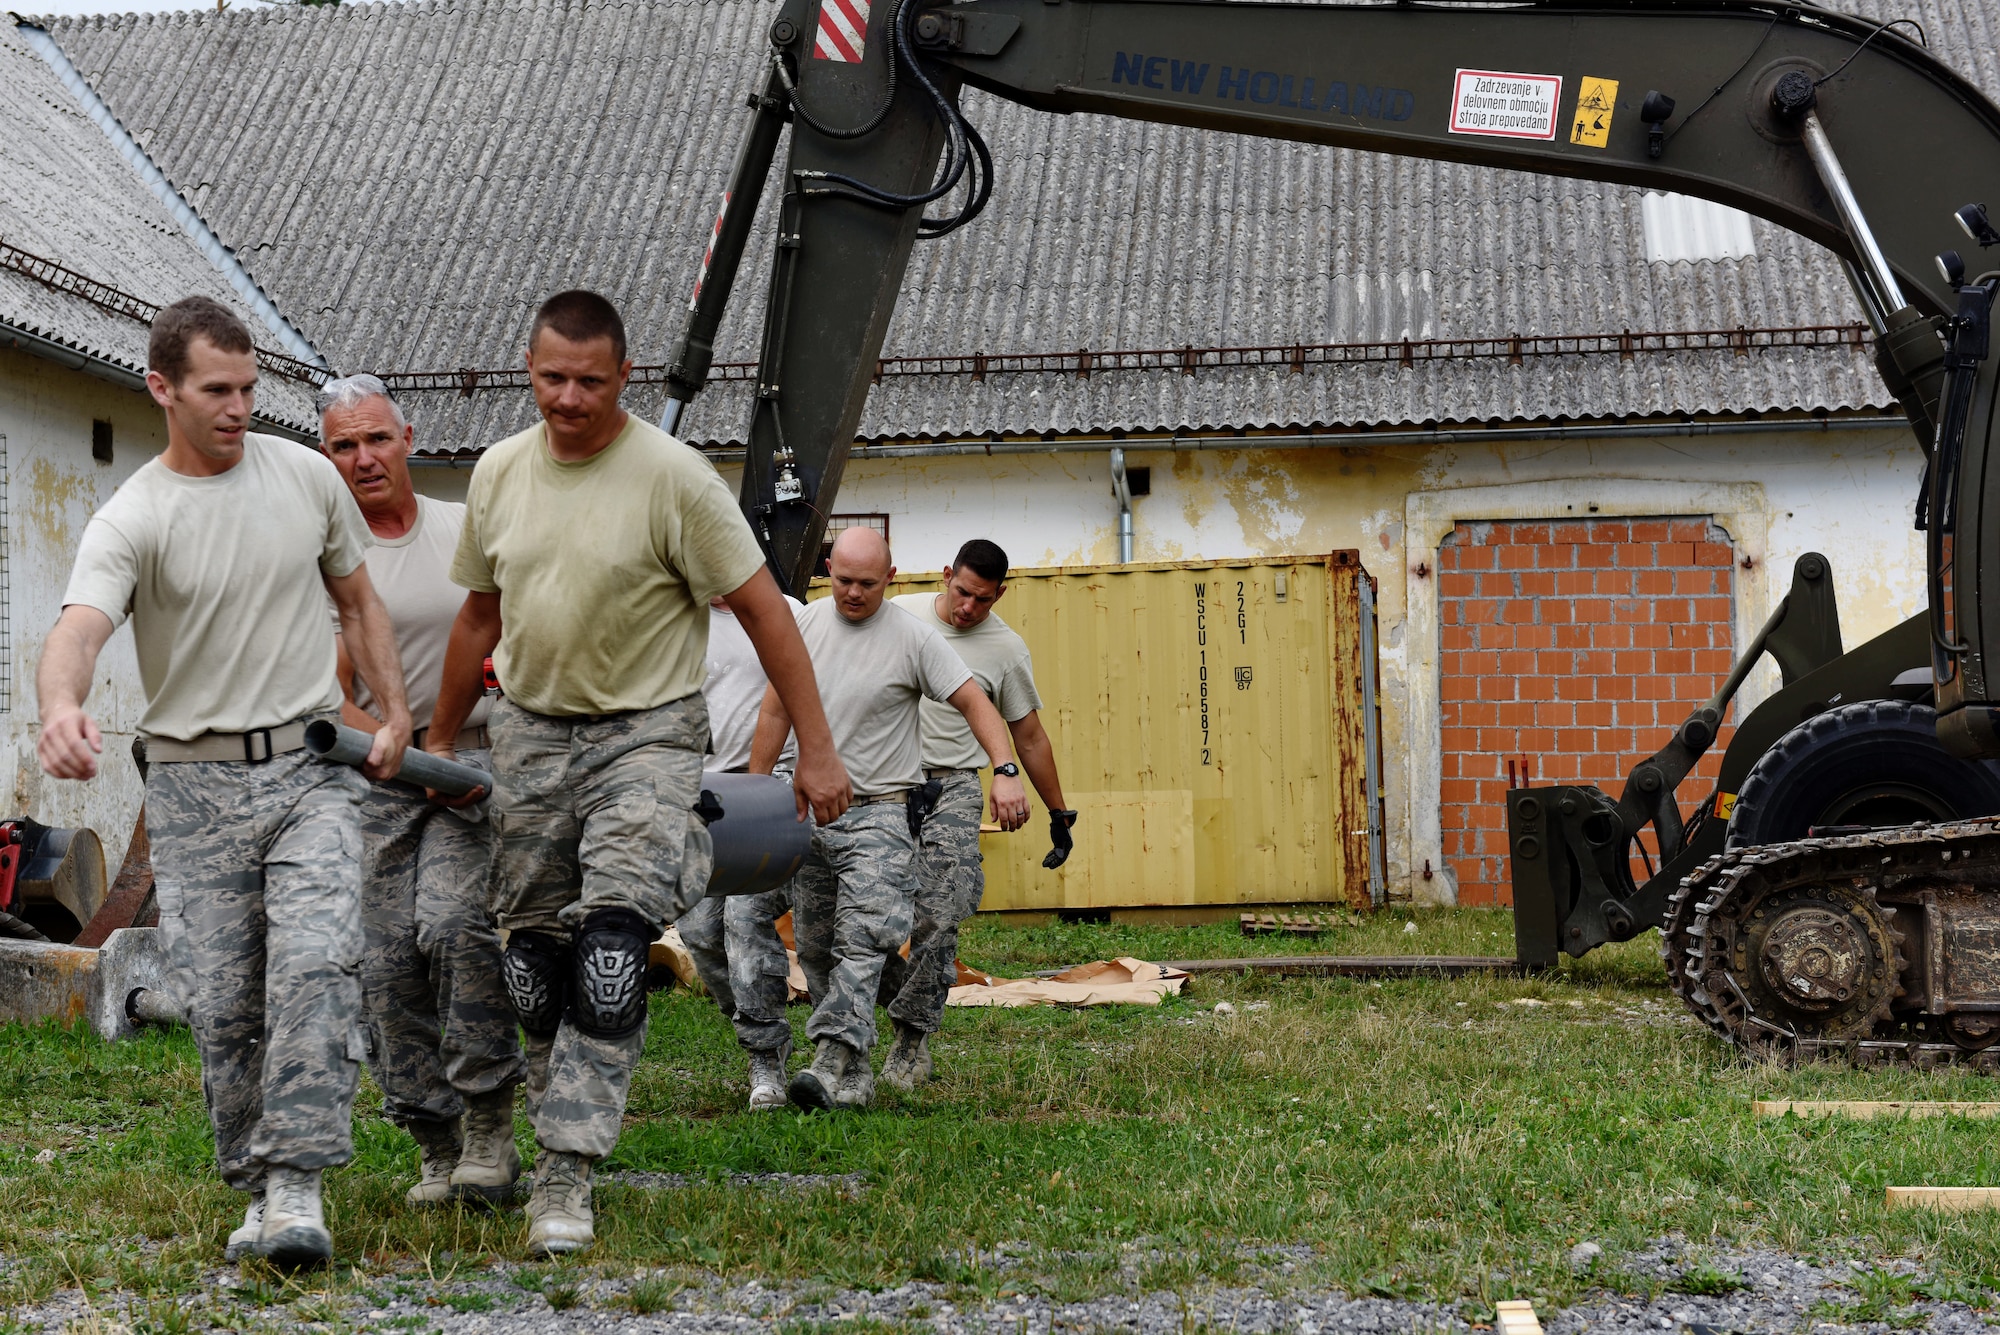 Members of the 140th Civil Engineer Squadron, Colorado Air National Guard (COANG) carry a roll of industrial floor vinyl into a barn at Pocek Range, near Postonja, Slovenia, July 23, 2015. The COANG is on a deployed for training mission as part of the Colorado State Partnership Program (SPP), revamping a historically old barn into a range center facility to conduct multinational training for on ground and air-to-ground tactics in the European theater. The SPP is focused on building relationships while supporting one another and improving the strategic objectives of both countries. (U.S. Air National Guard photo by Senior Airman Michelle Y. Alvarez-Rea/Released)